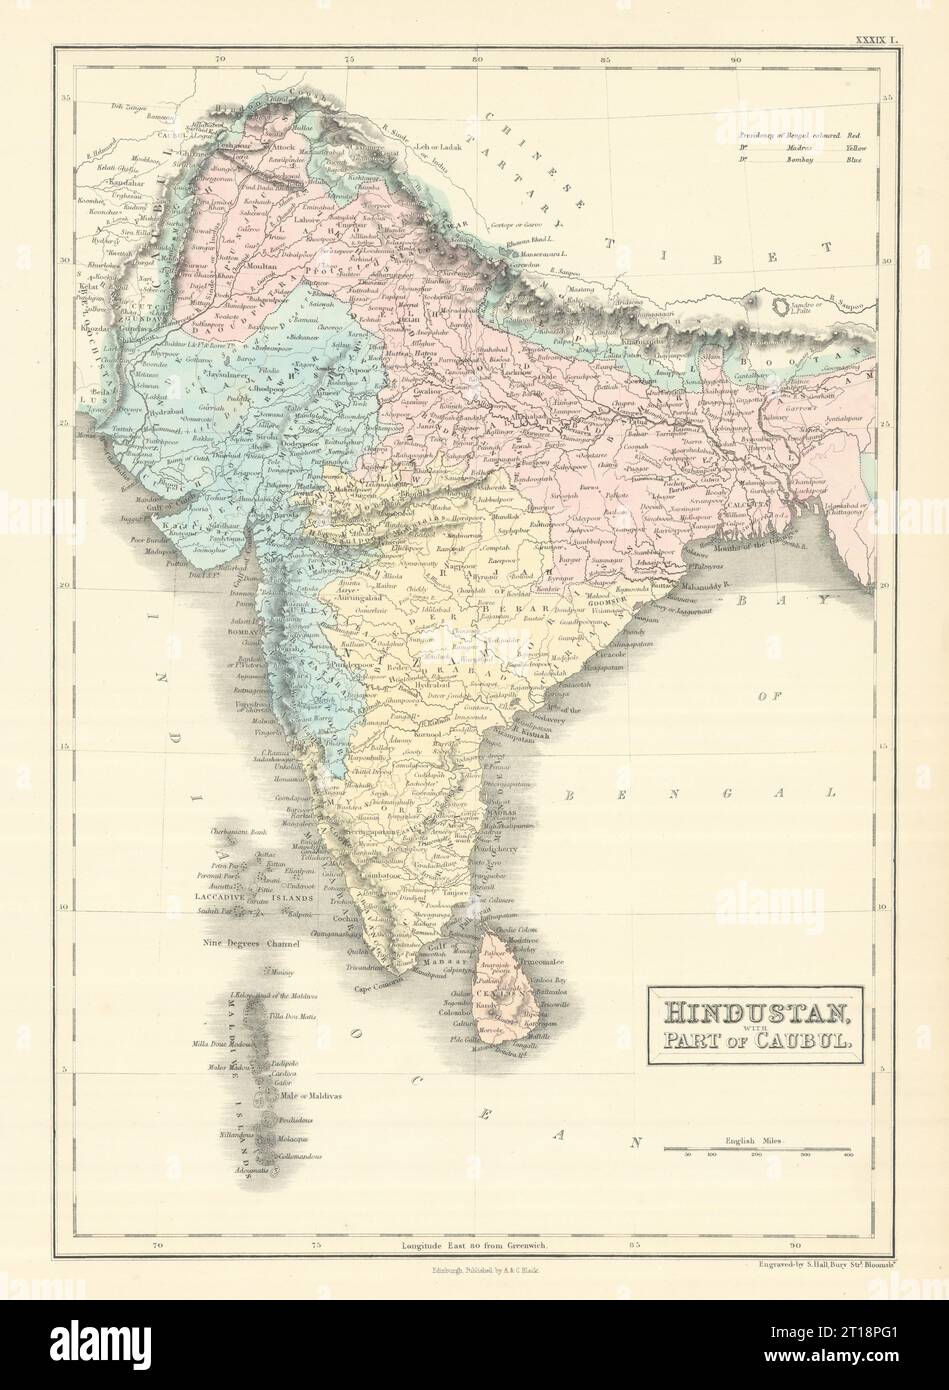 Hindustan with part of Caubul. British India & Afghanistan. SIDNEY HALL 1854 map Stock Photo